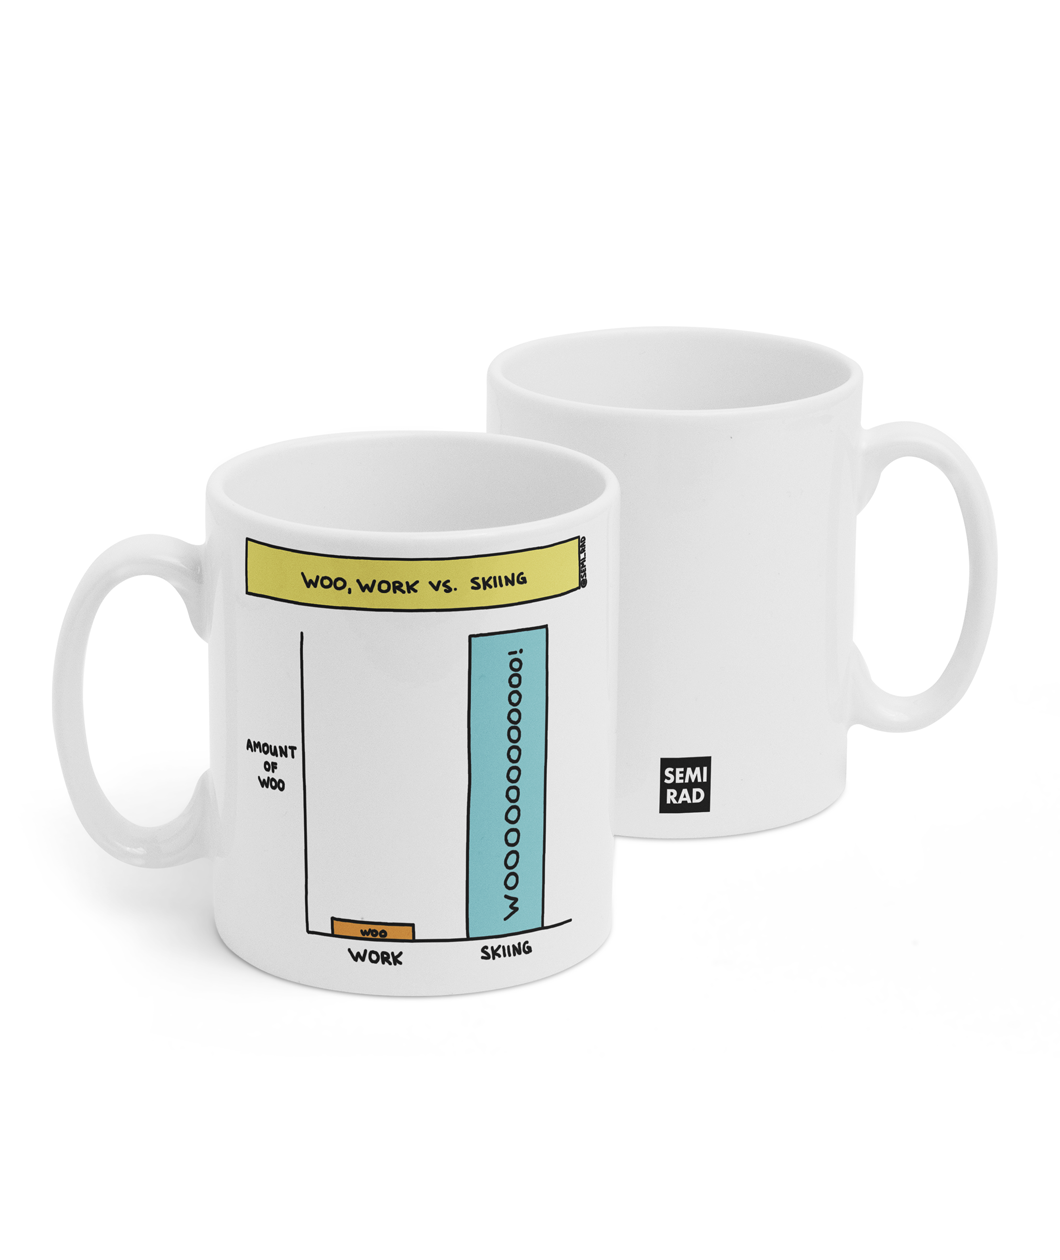 Two white mugs sitting next to each other showing two sides of the same mug. The front side has a graph of "Woo, work vs skiing" with "amount of woo" on the y axis and "work" and "skiing" on the y. The woo bar is much higher for skiing than work. On the back of the mug is a small black square with the words "Semi Rad".